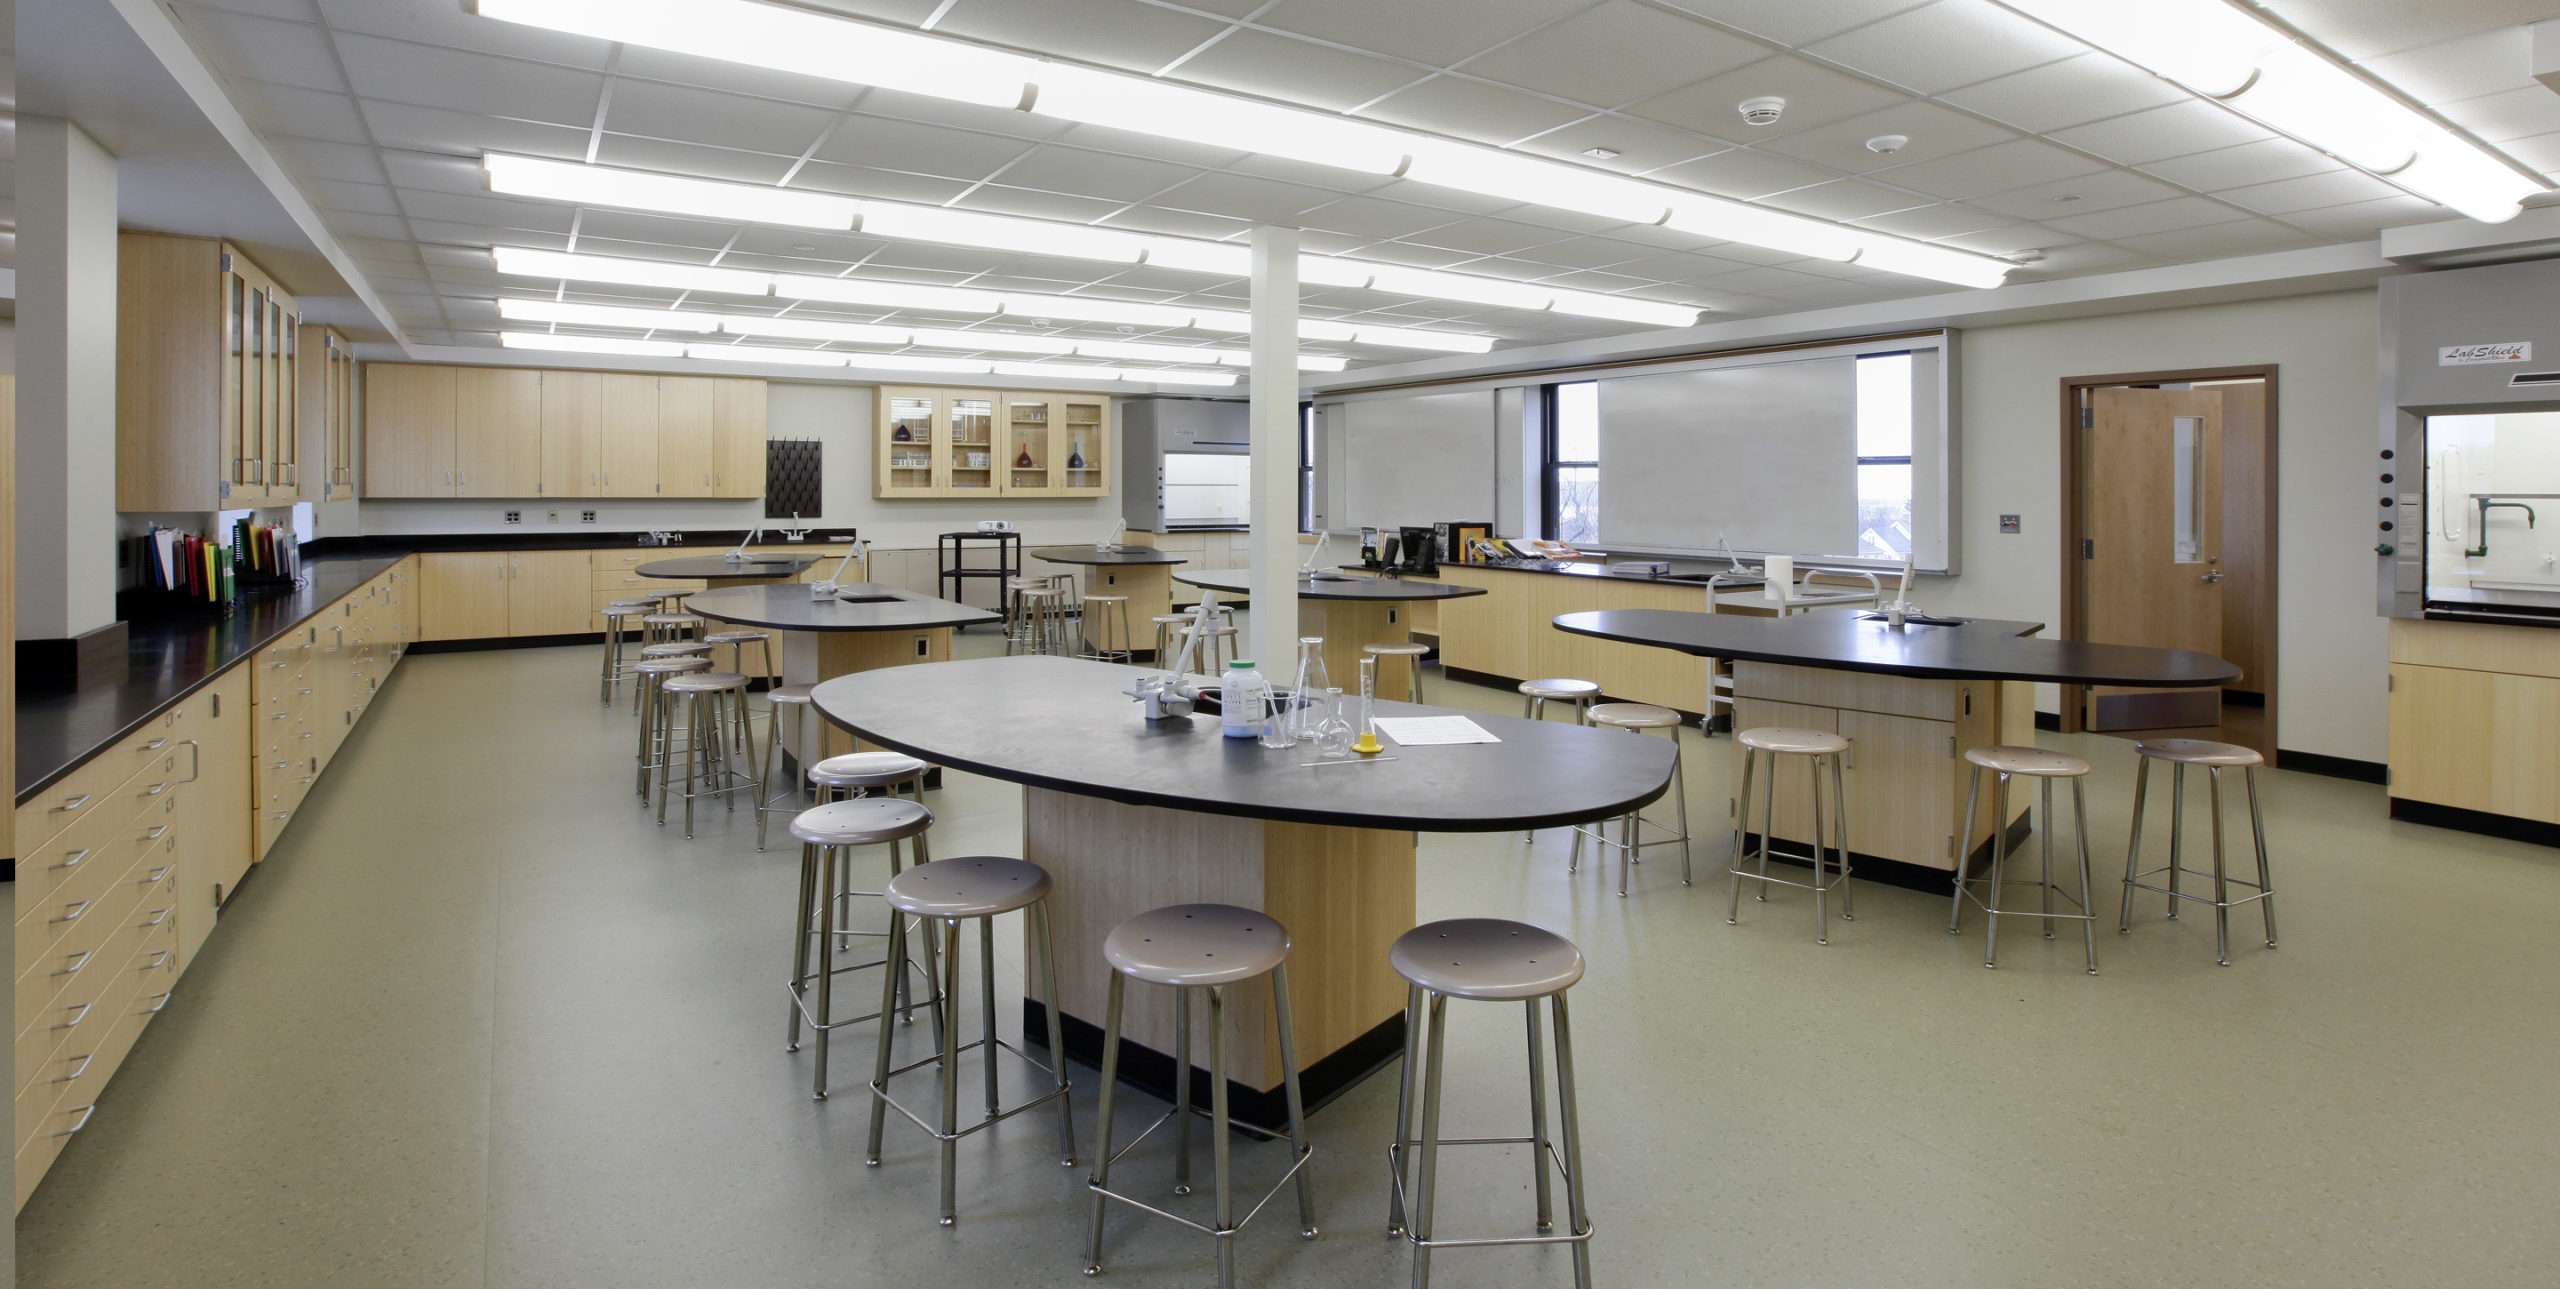 Science classroom at St. Dominic's High School in Oyster Bay